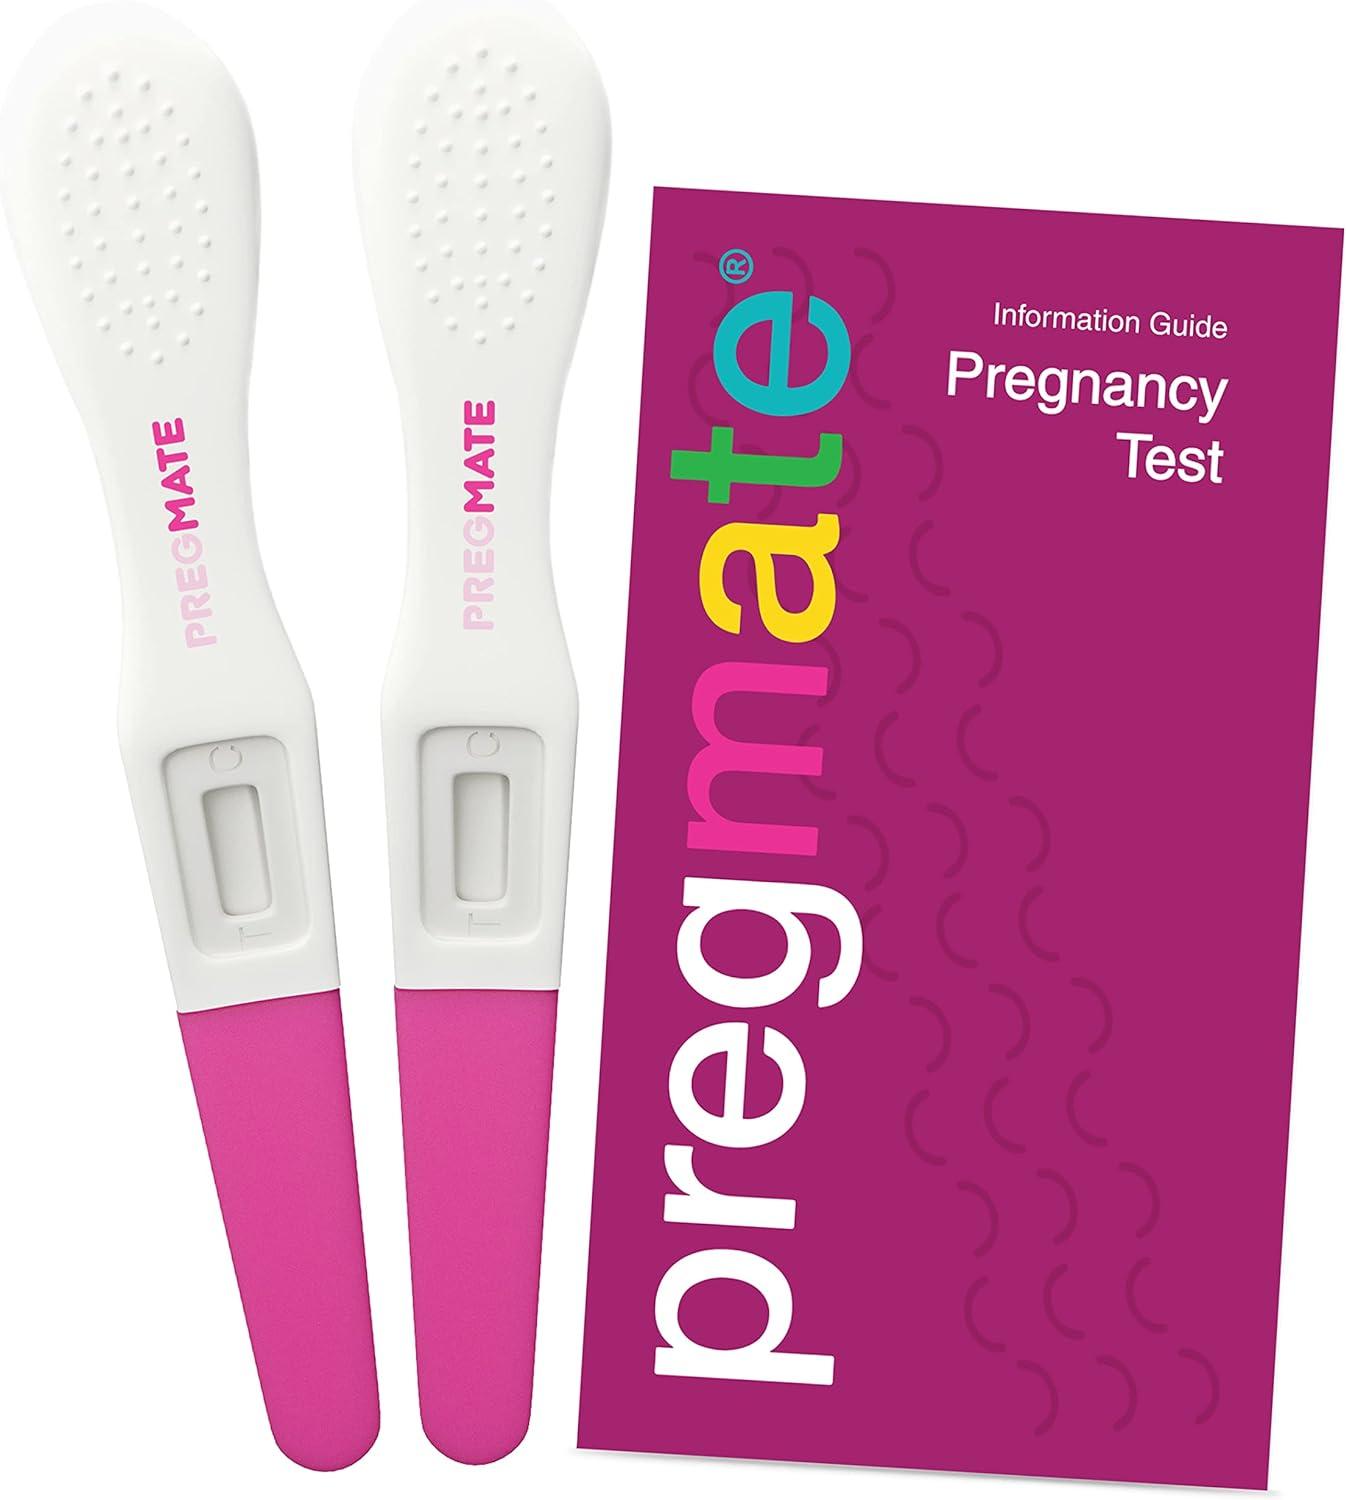 When to collect urine for the pregnancy test? – PREGMATE